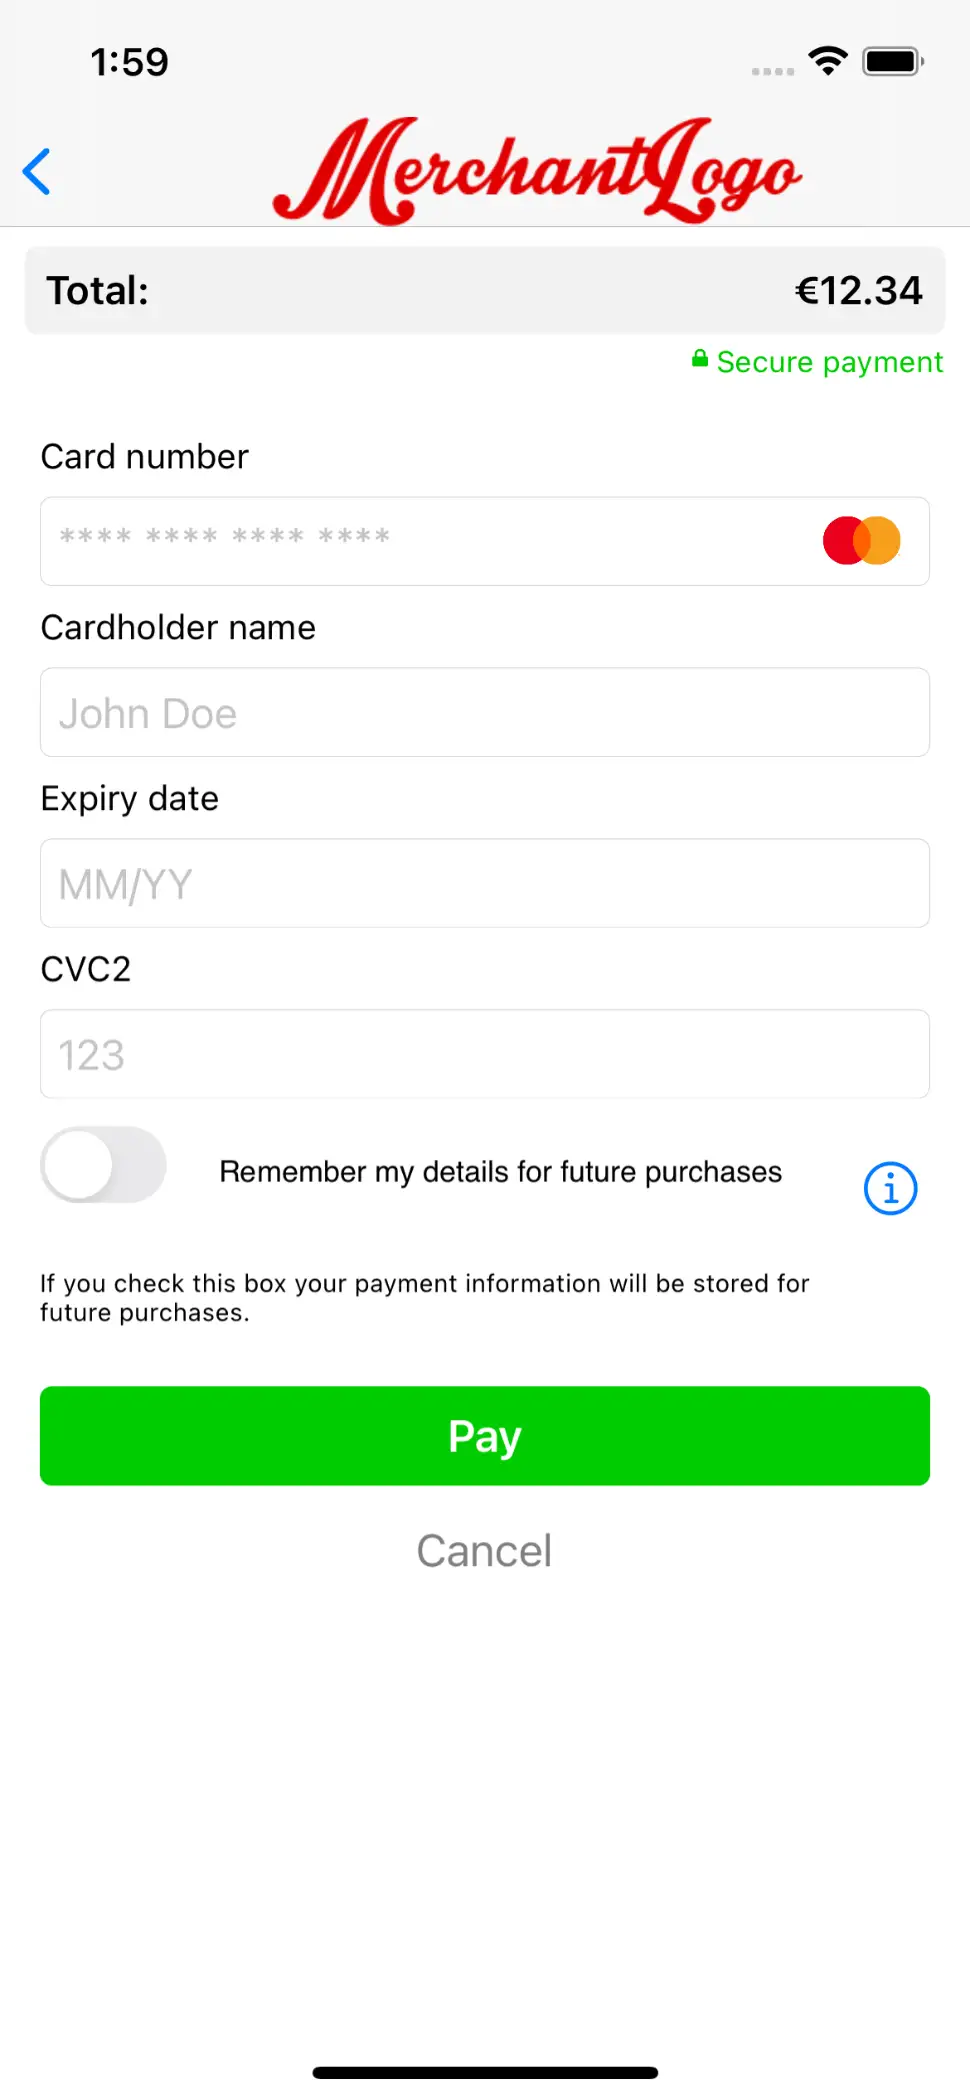 The image above shows the payment product input activity screen after pressing the information button.